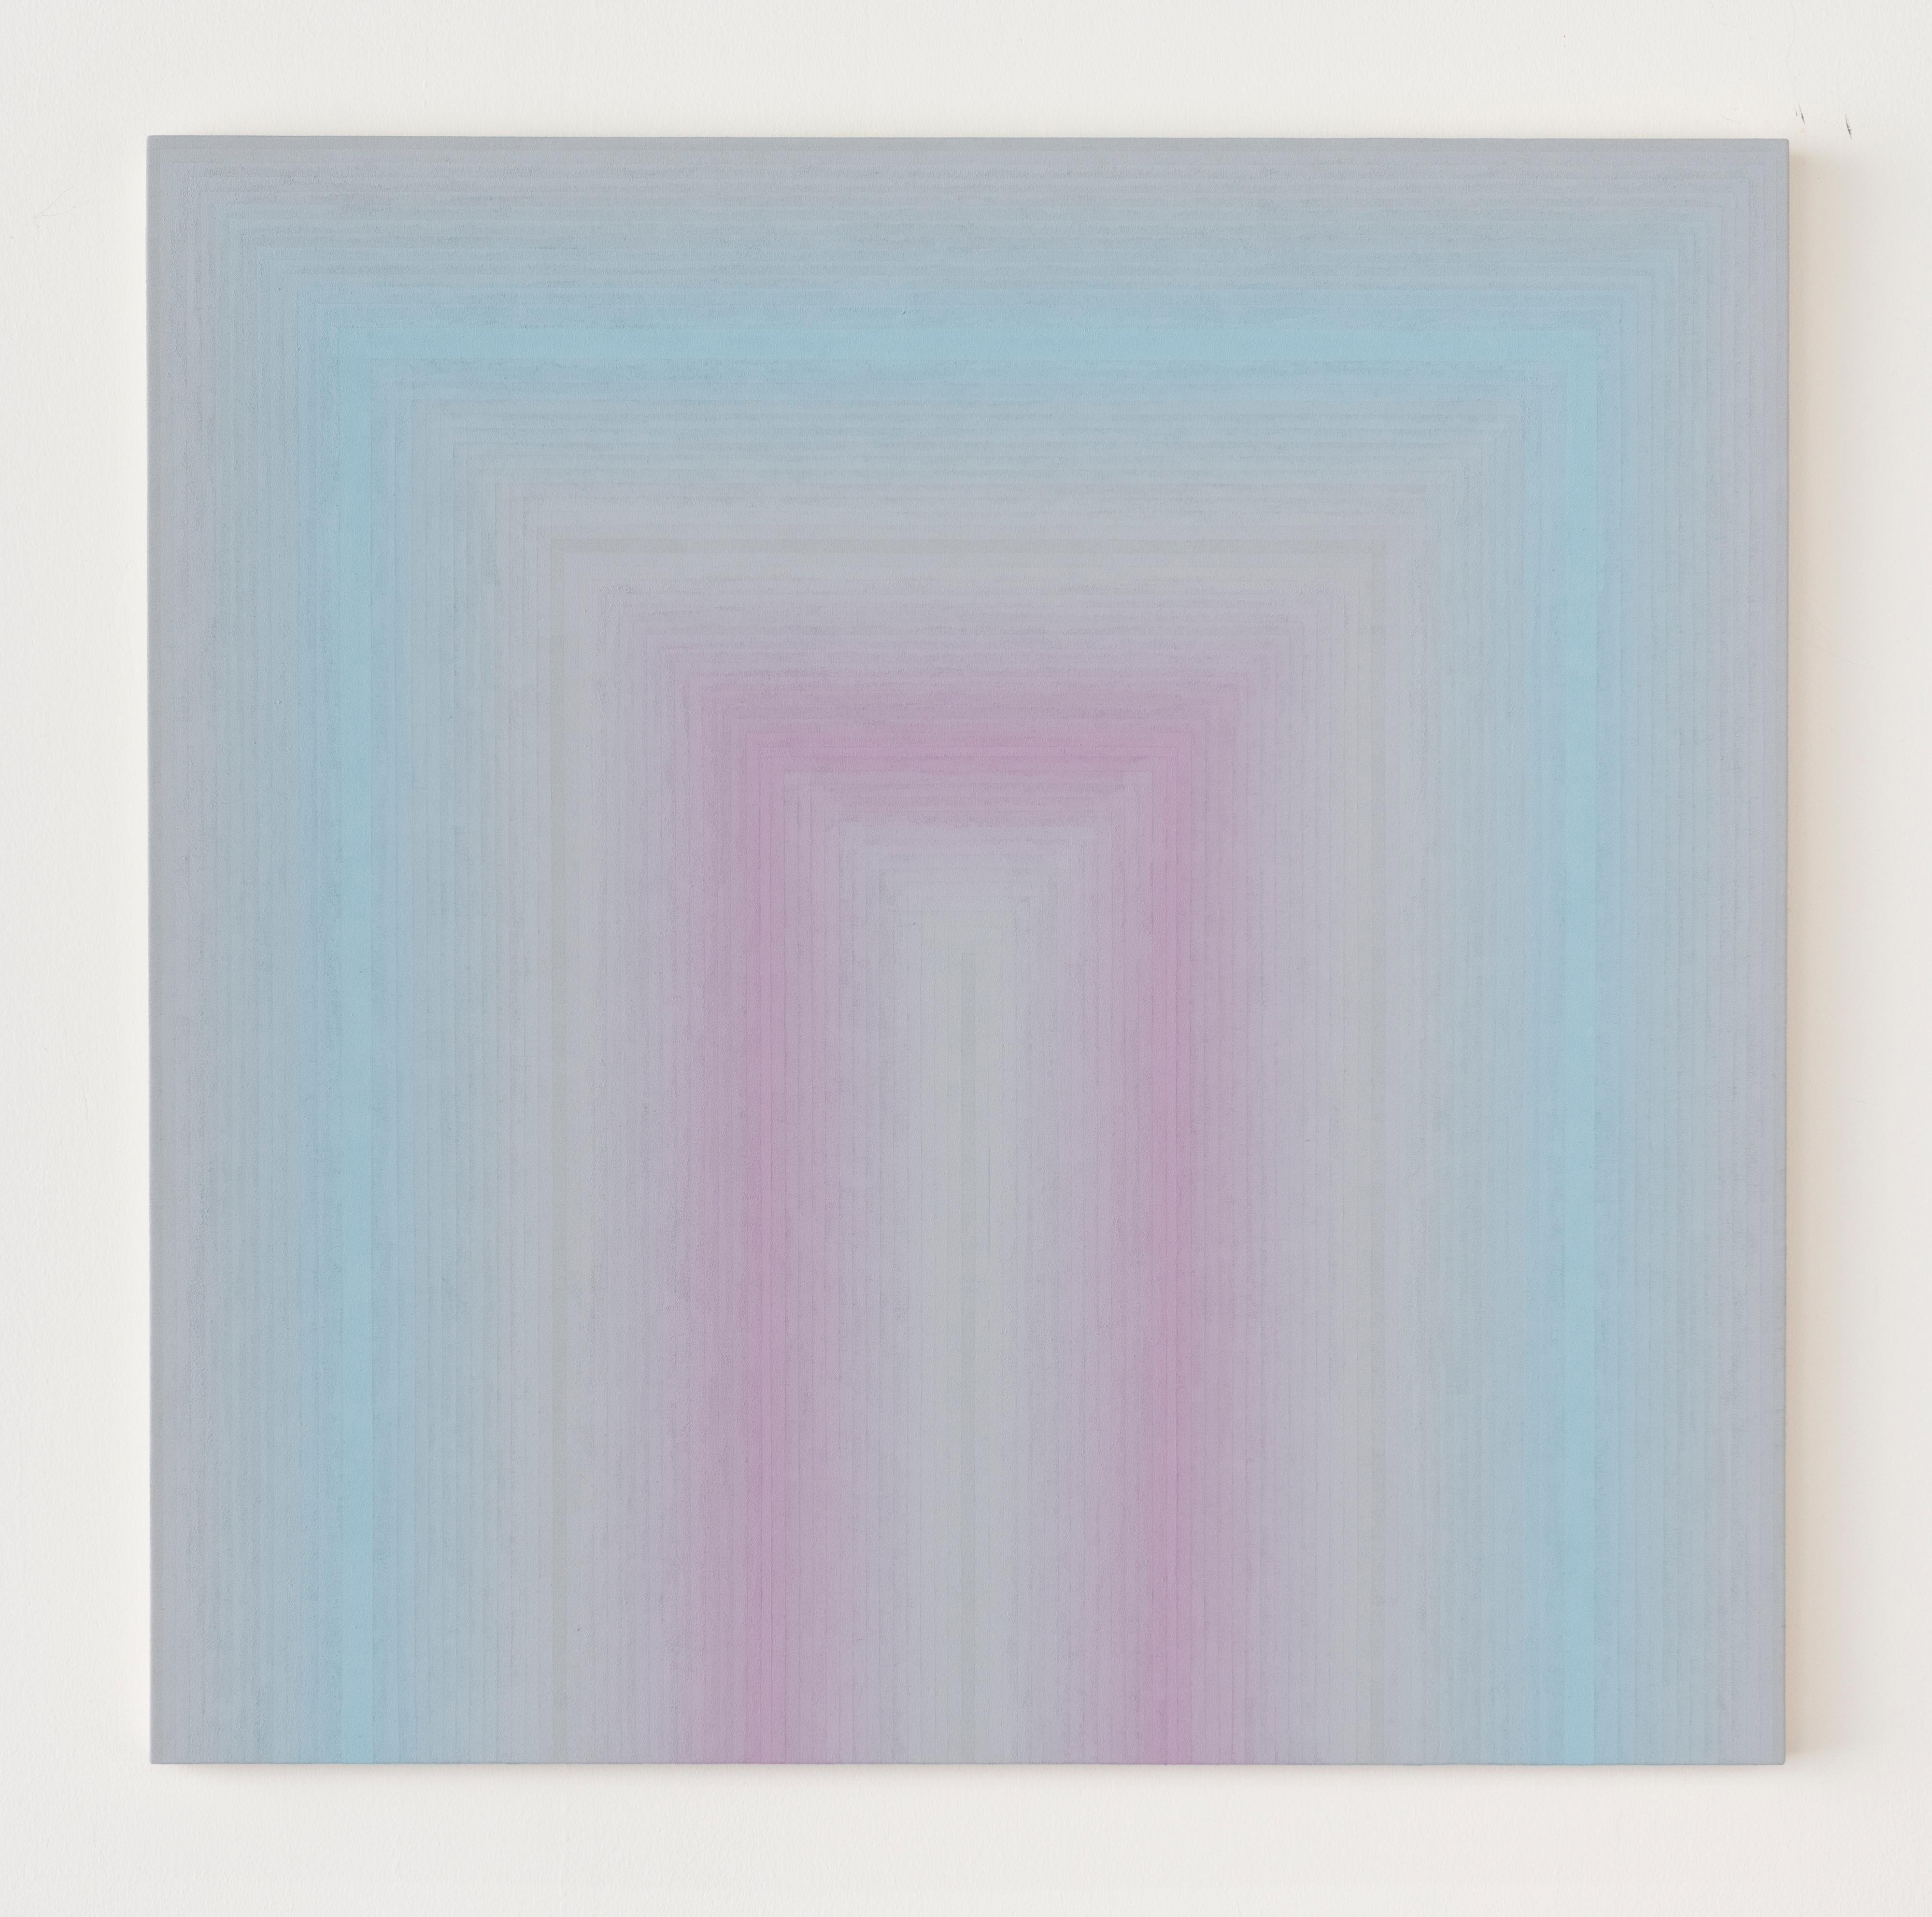 In this square abstract painting in flashe on canvas, thin, carefully ordered stripes of color in gradient shades of soft hues, starting with pale shade of gray in the center to light lilac, soft gray and pale sky blue transitioning back to light